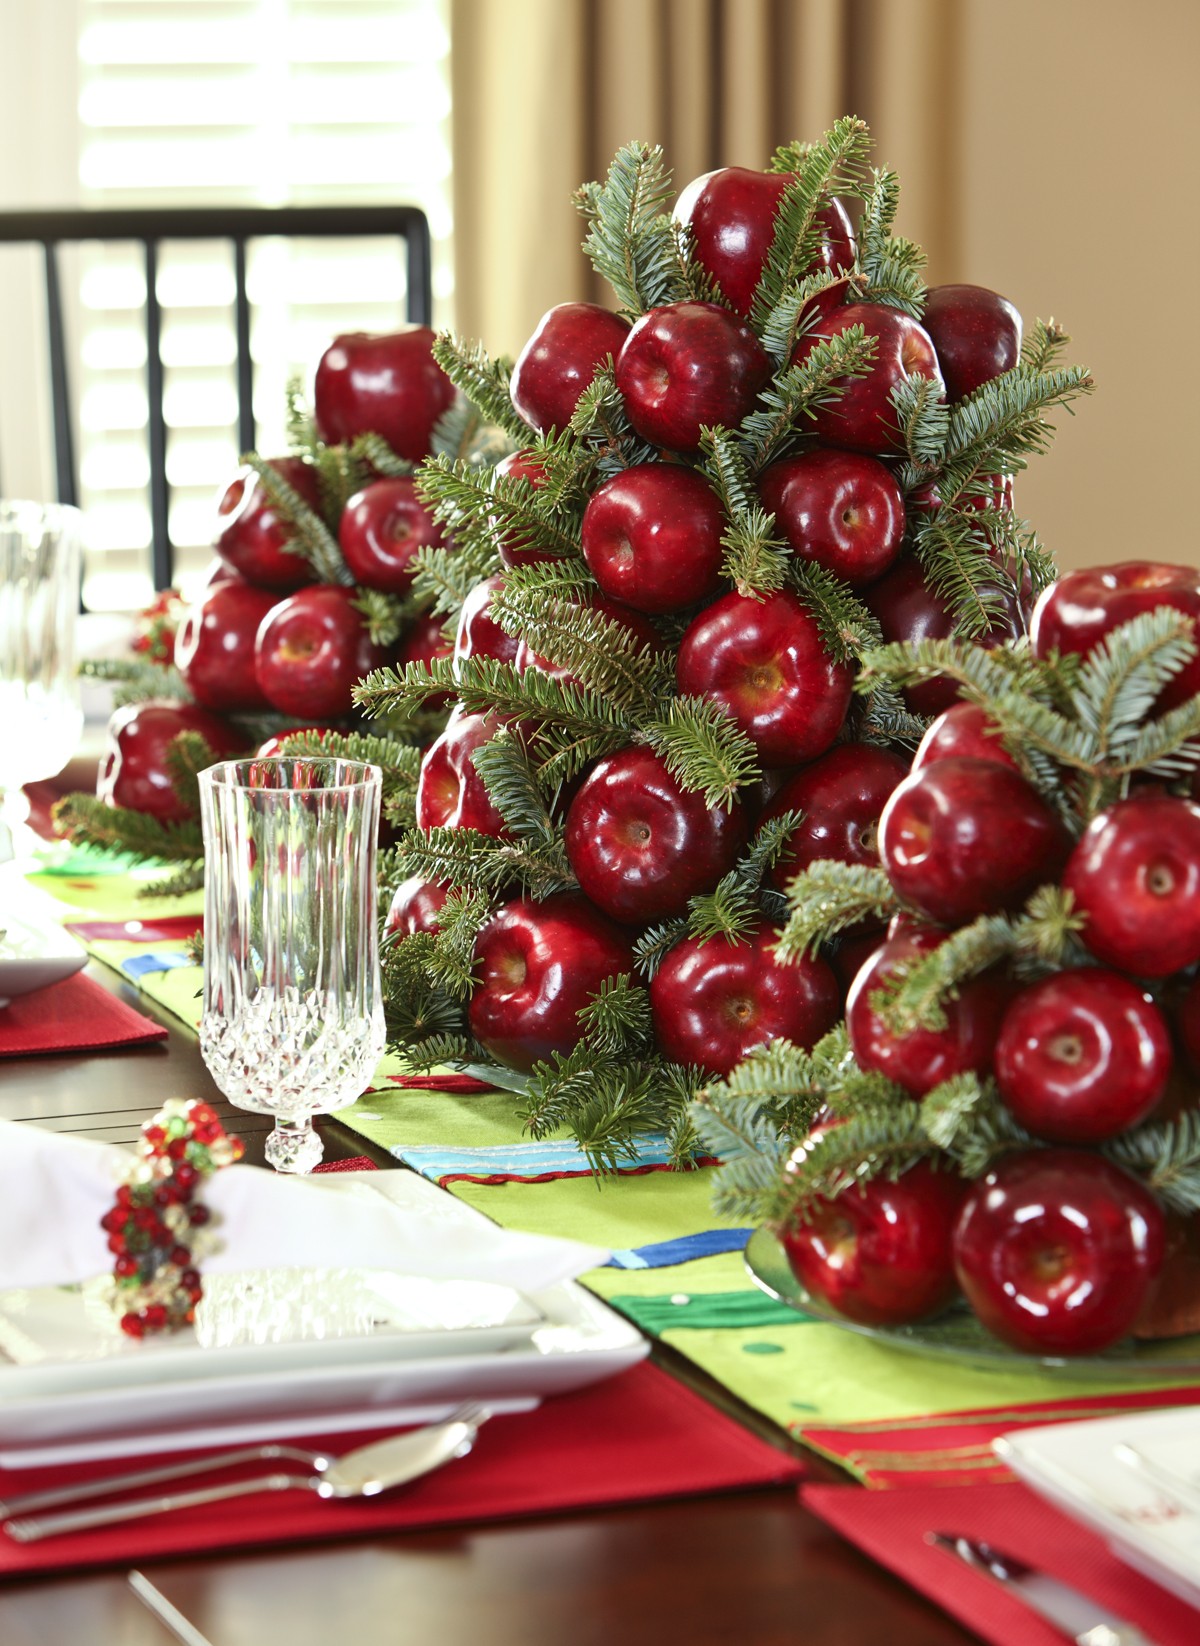 Candied Apples for Christmas